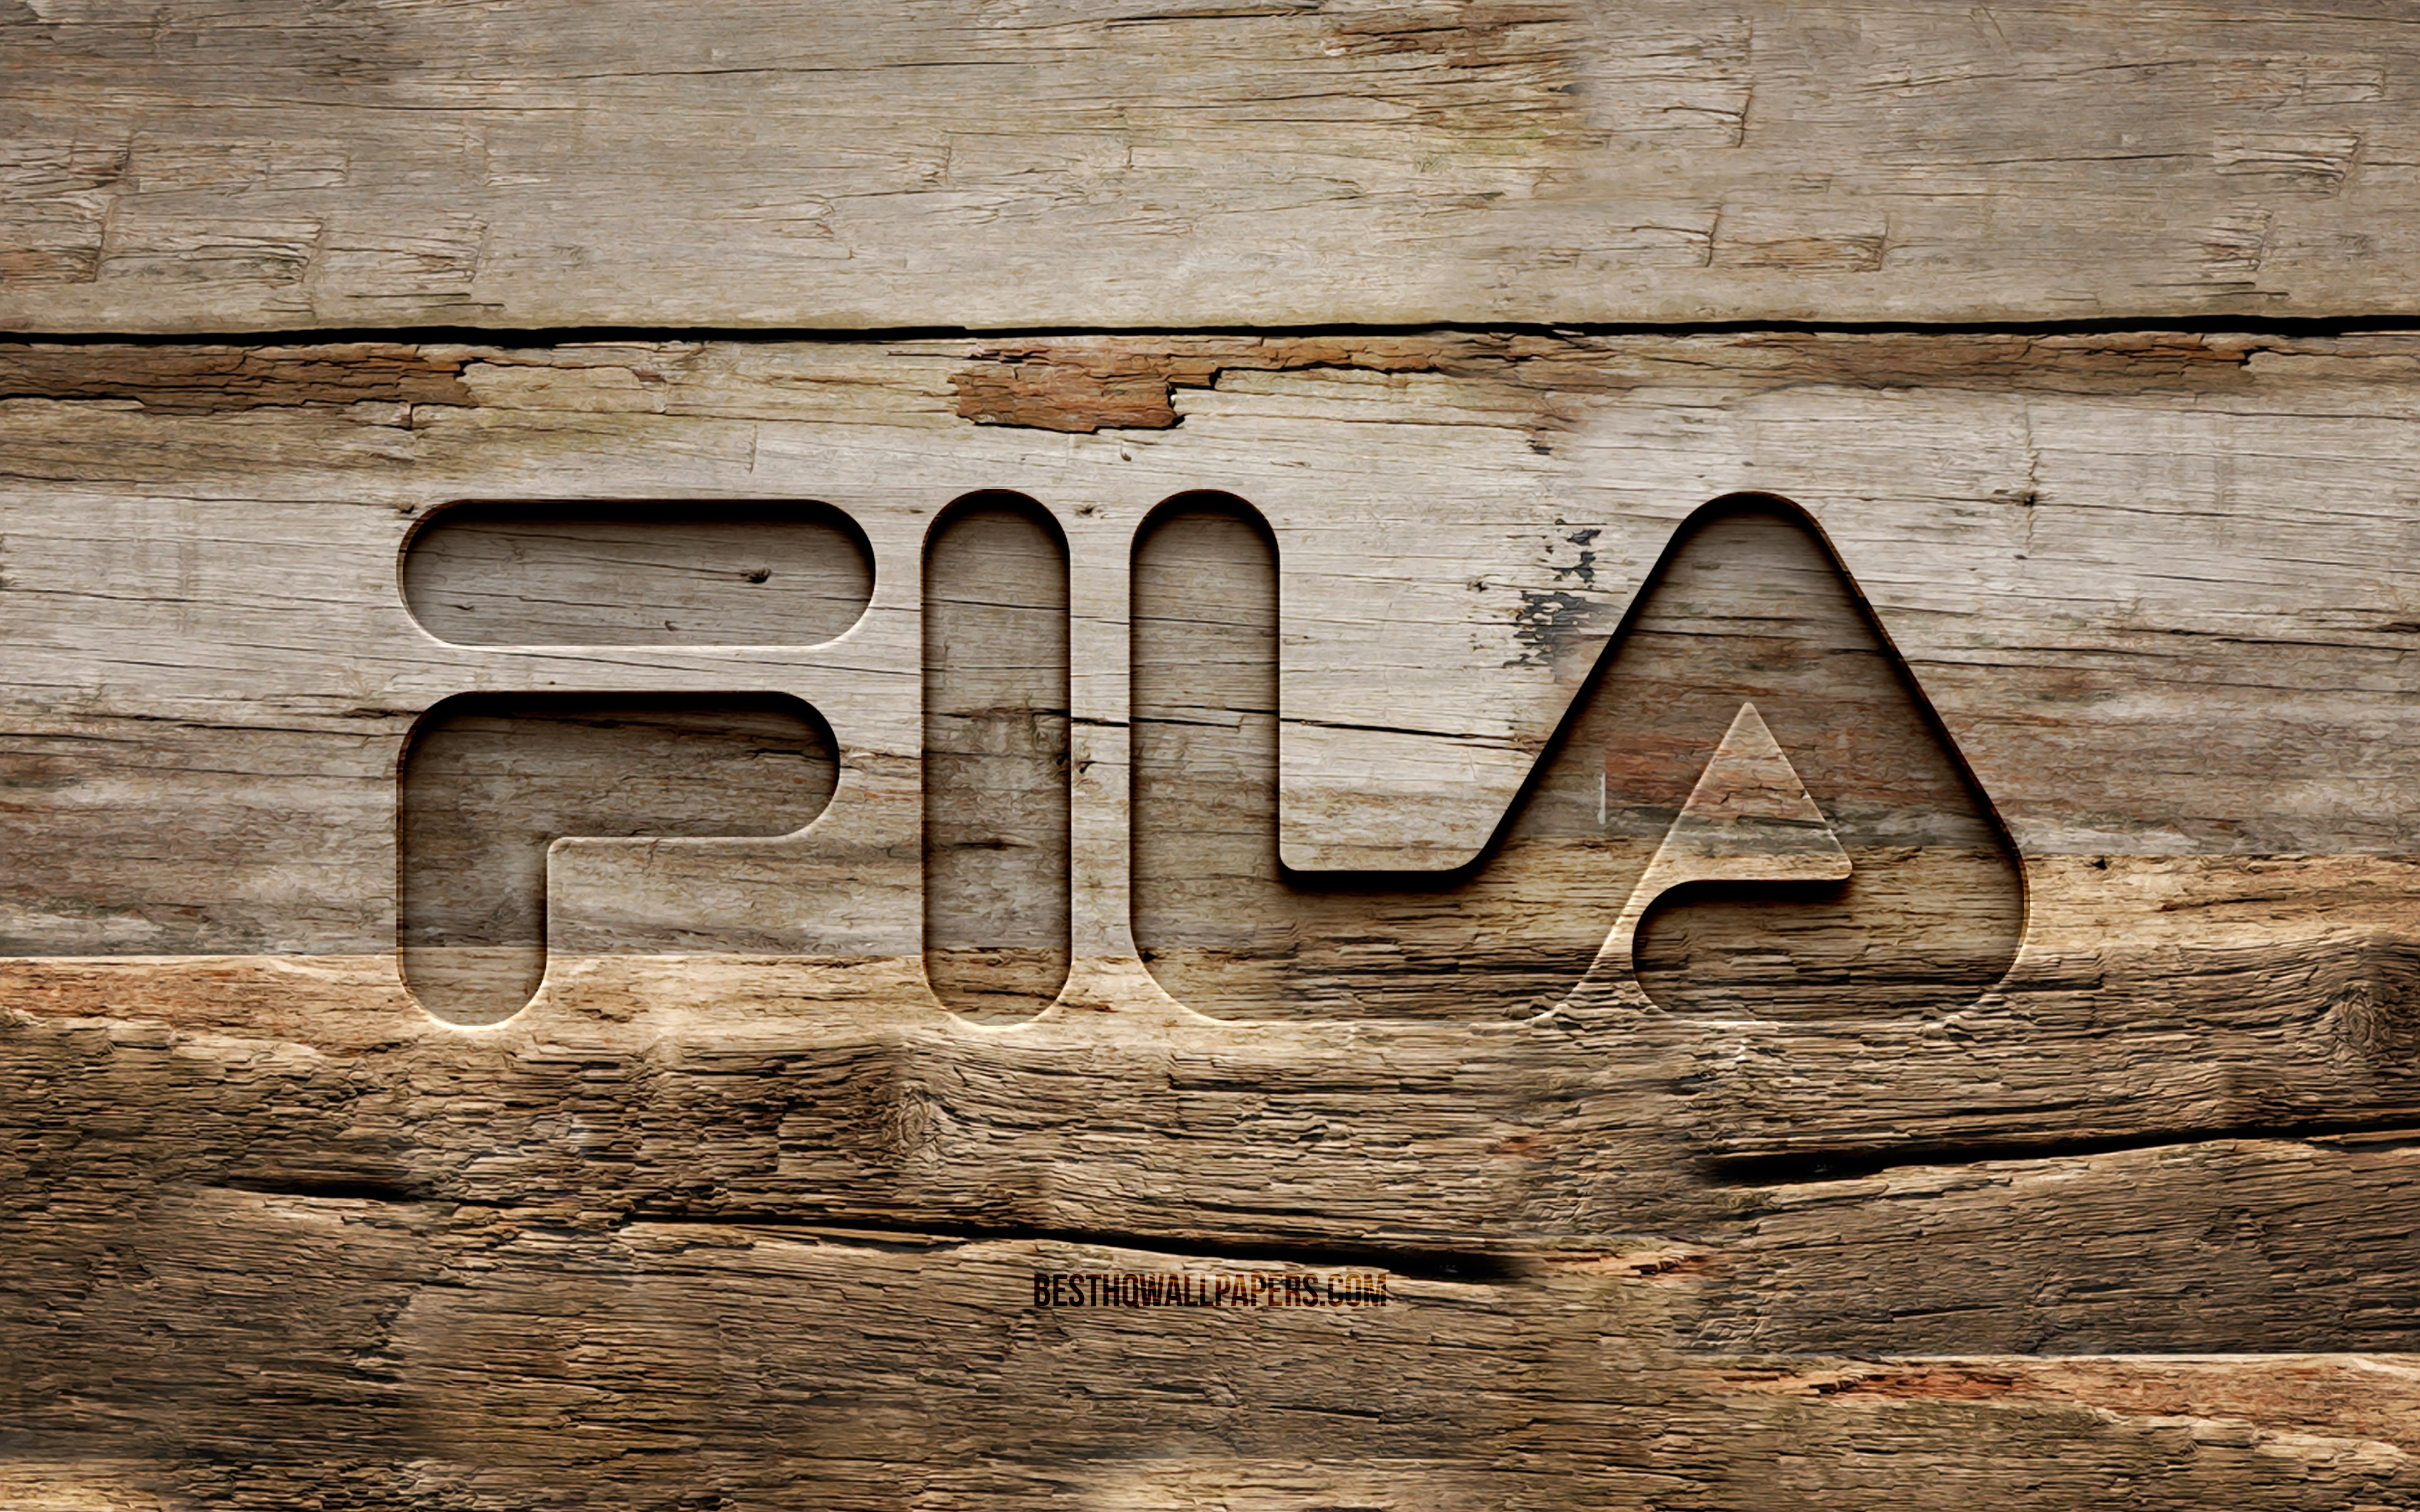 Download wallpaper Fila wooden logo, 4K, wooden background, fashion brands, Fila logo, creative, wood carving, Fila for desktop with resolution 3840x2400. High Quality HD picture wallpaper